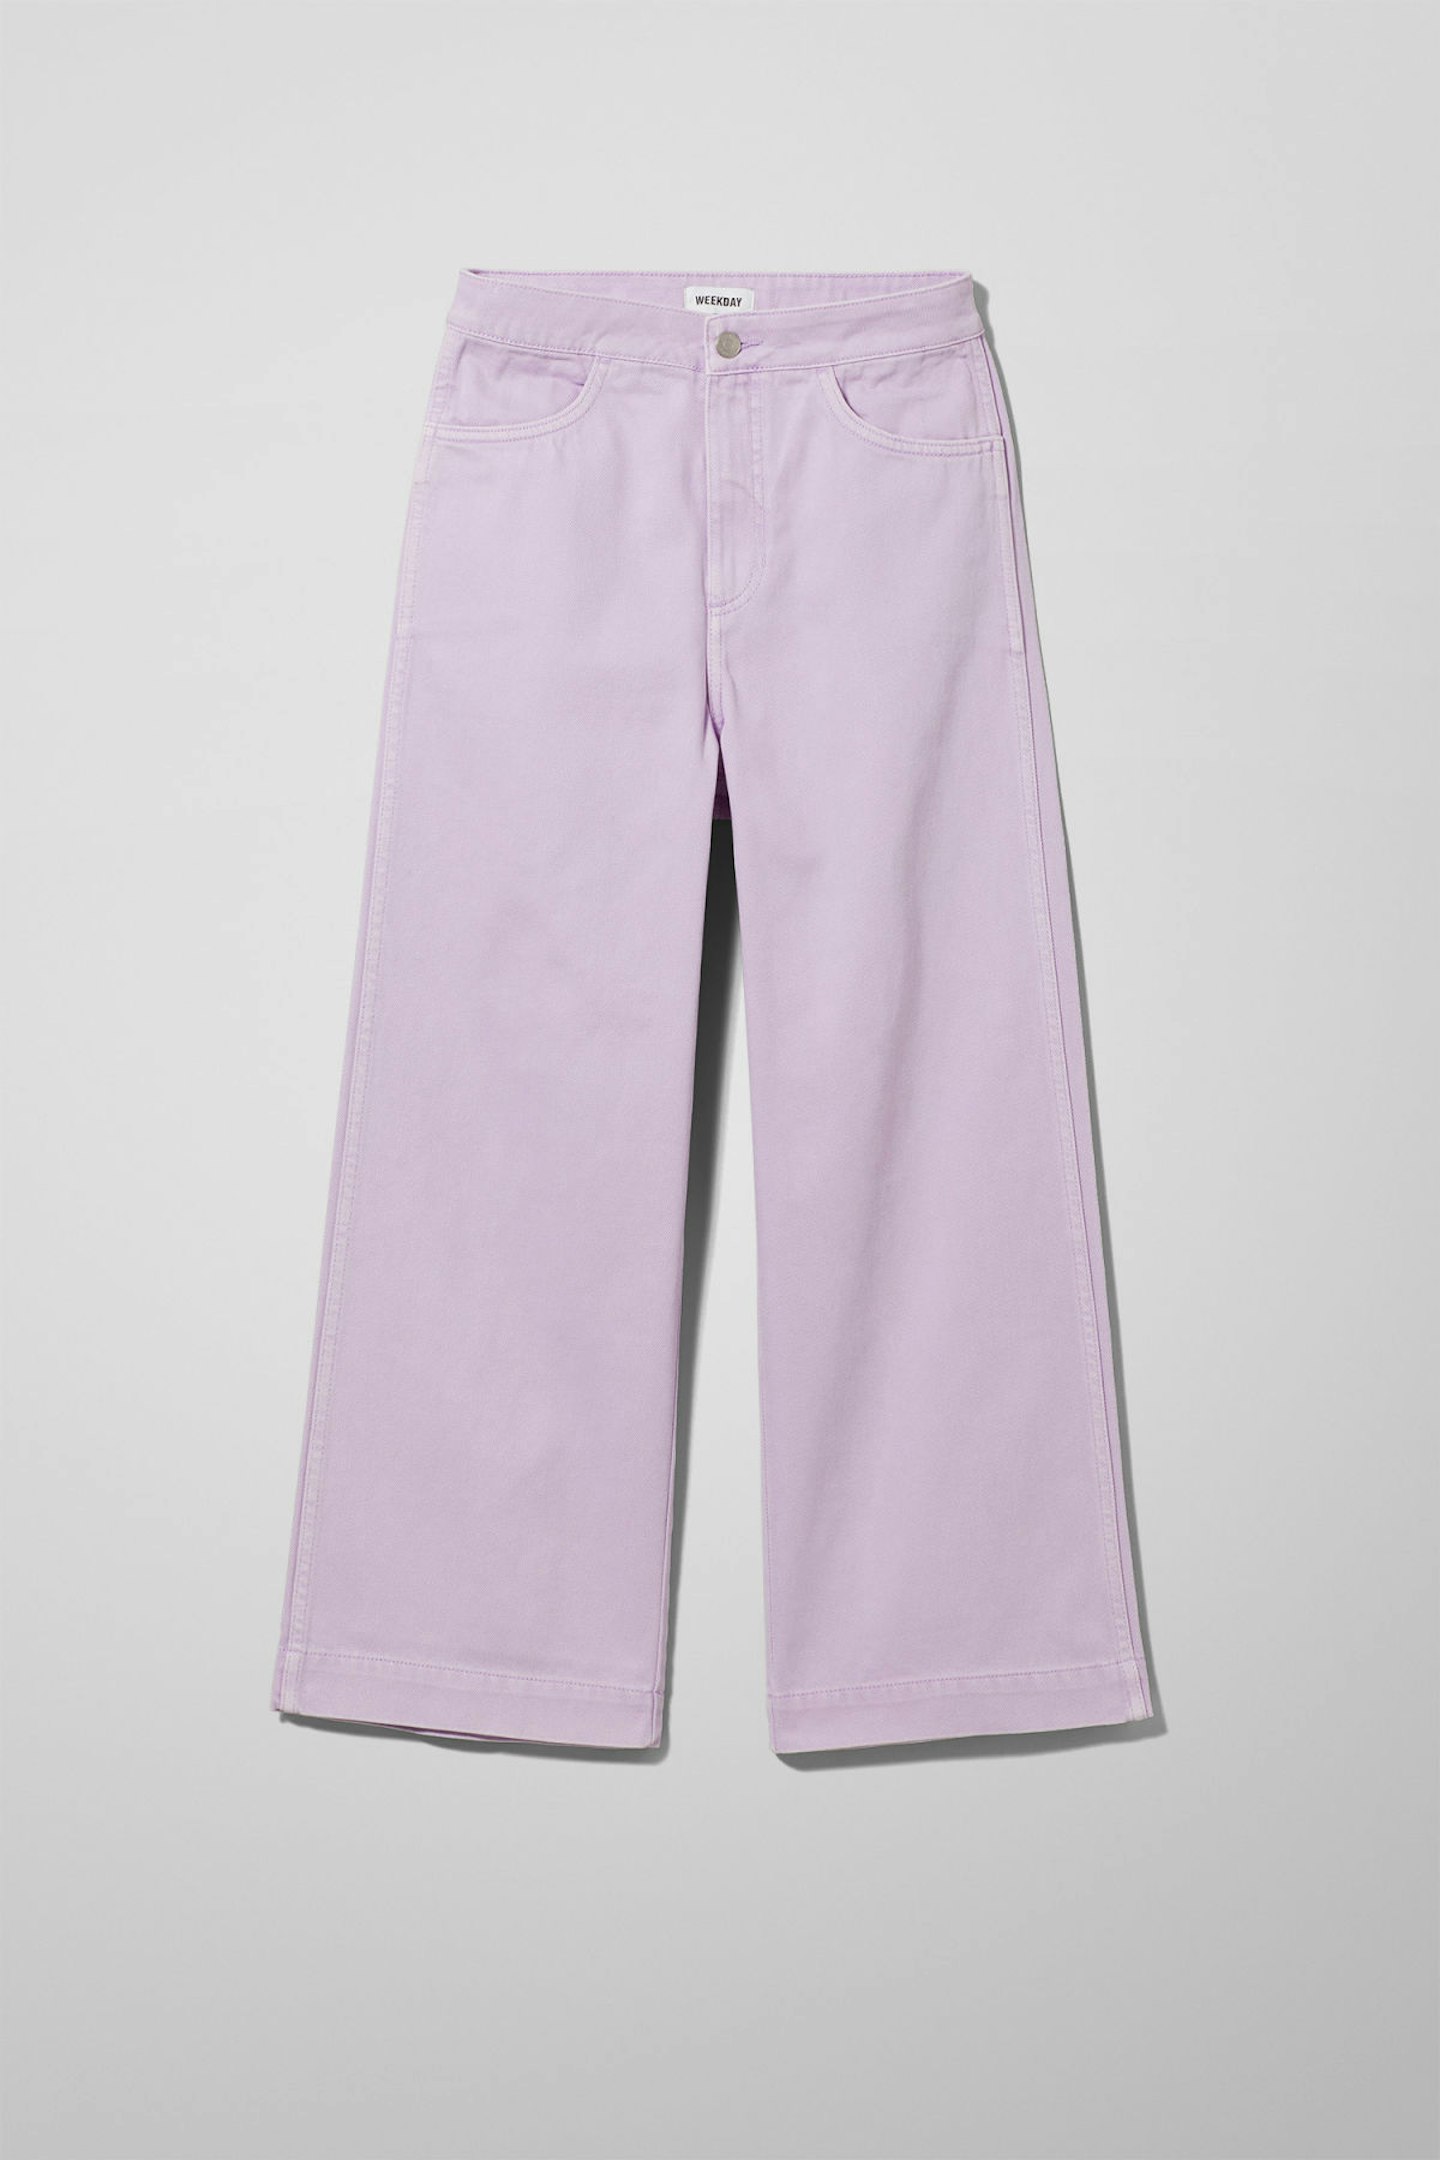 Weekday, Lilac Jeans, £45